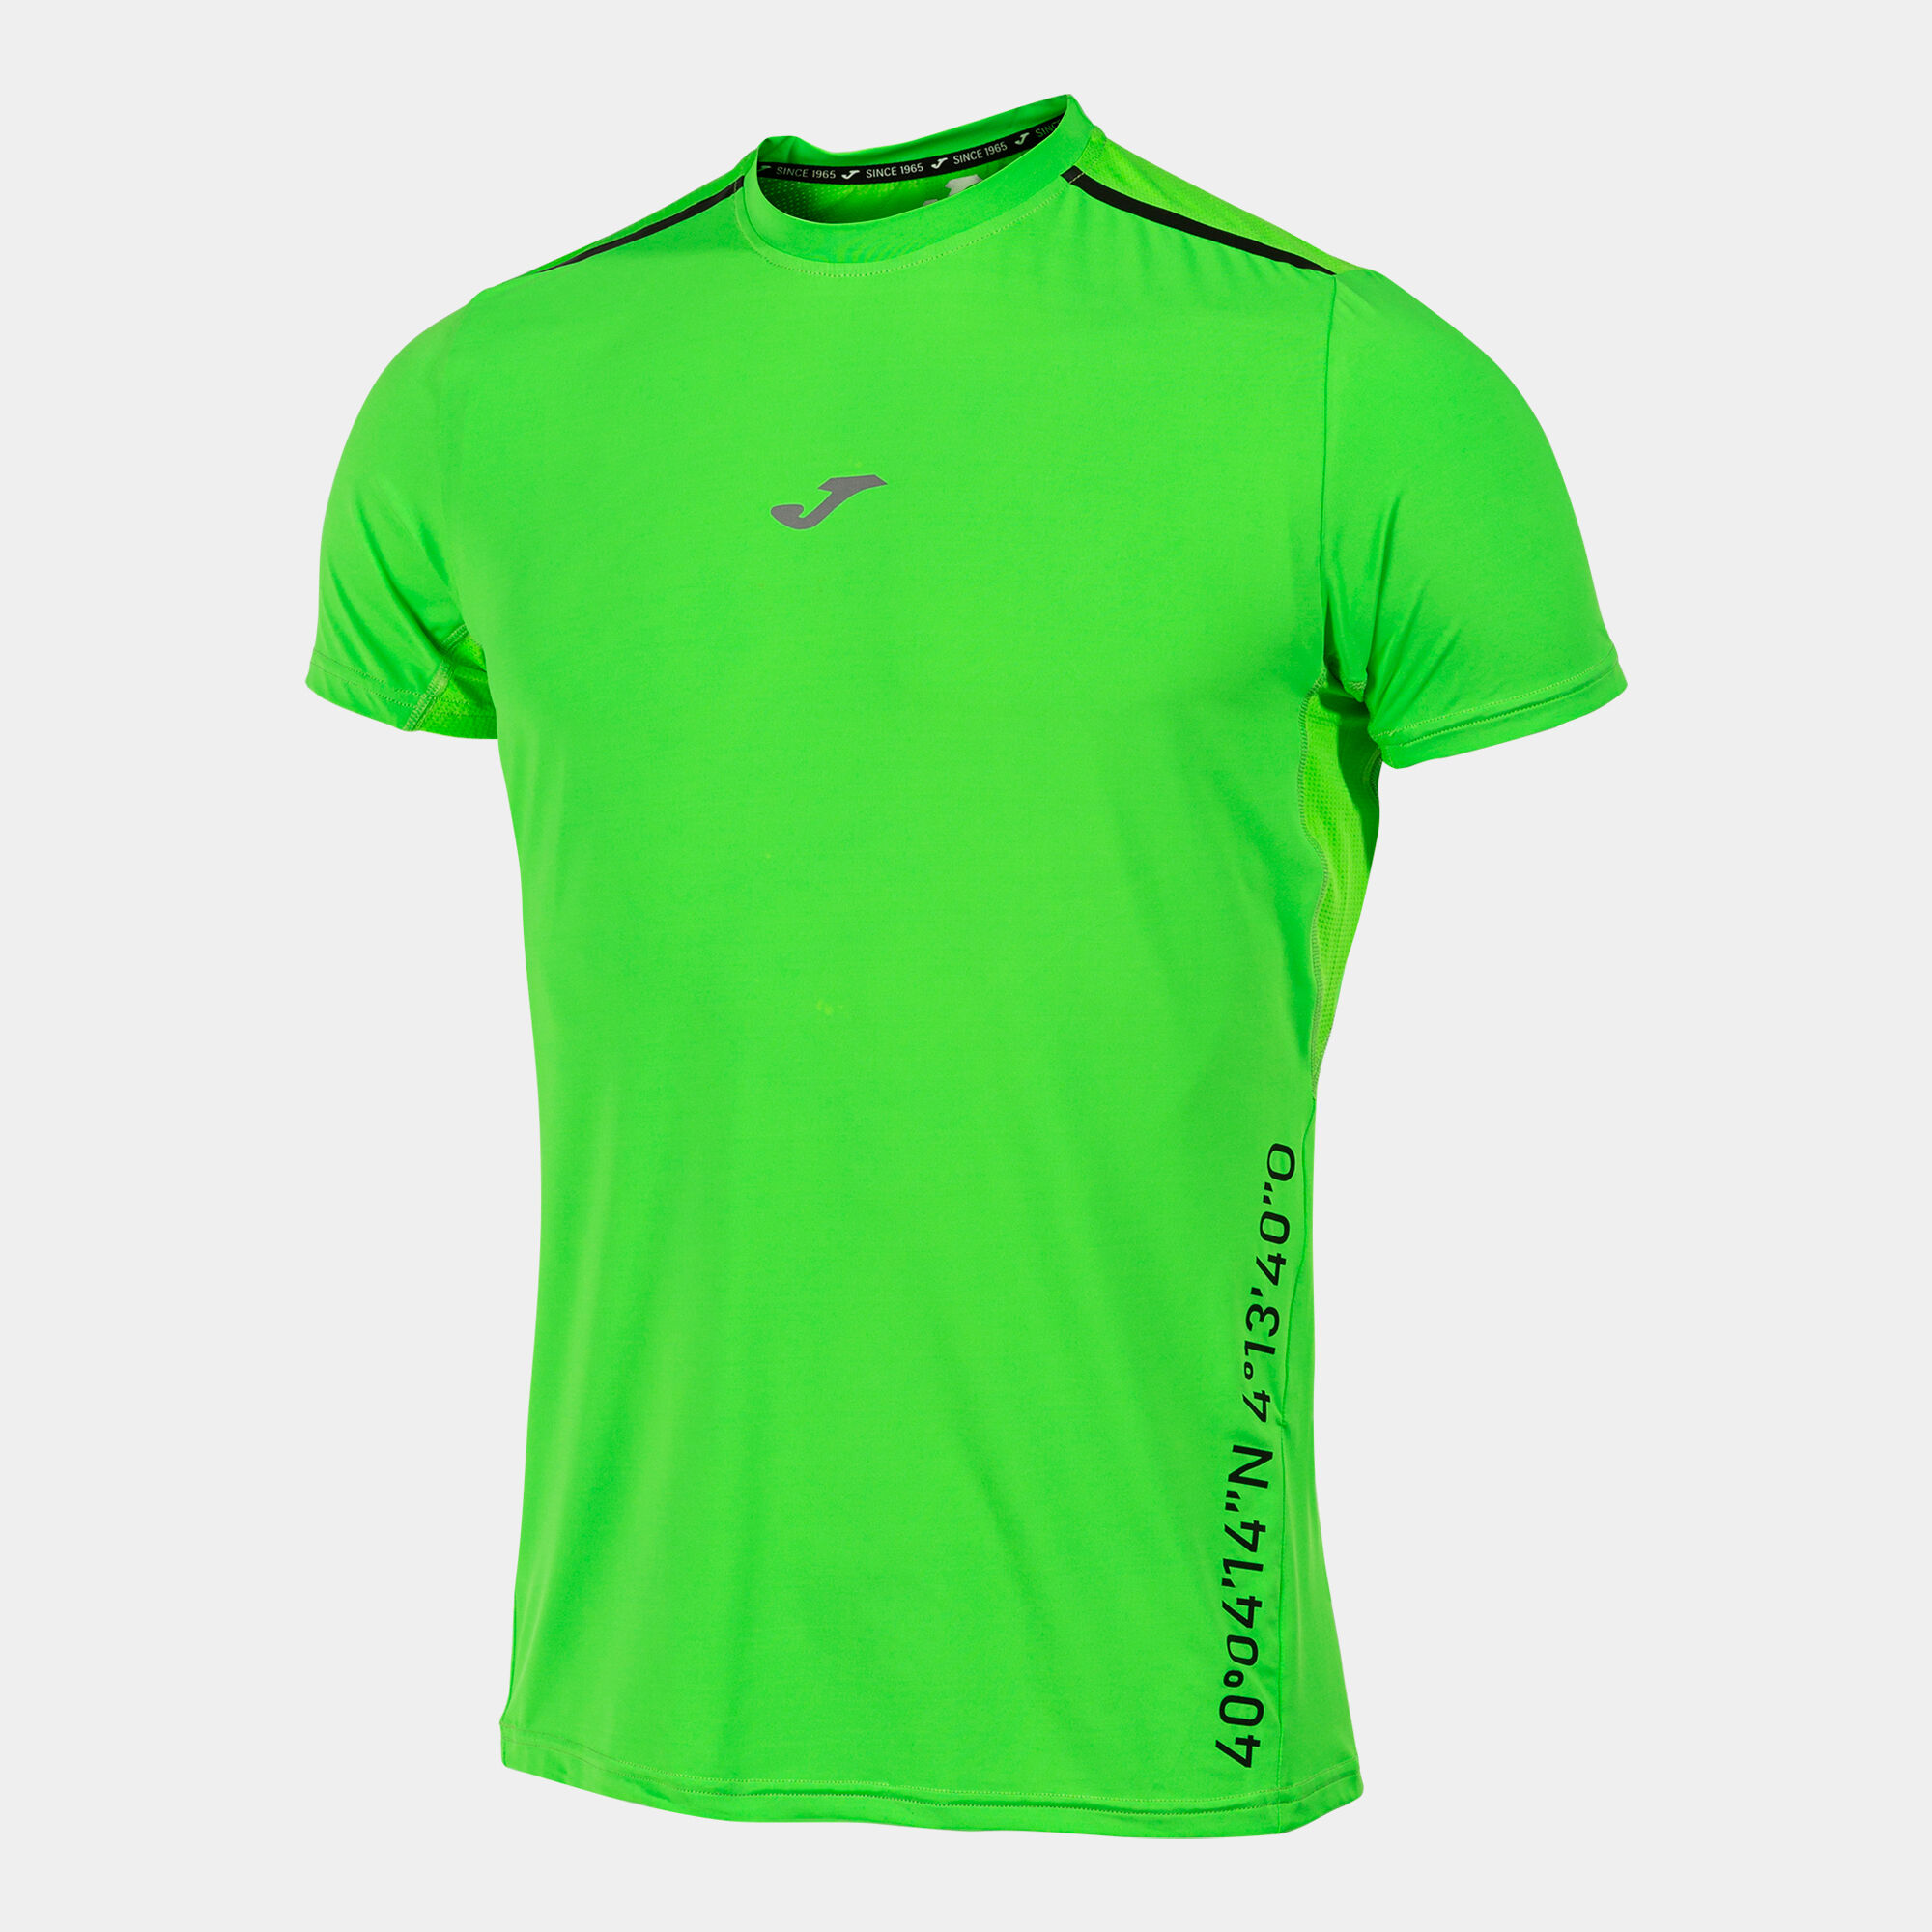 MAILLOT MANCHES COURTES HOMME R-CITY VERT FLUO